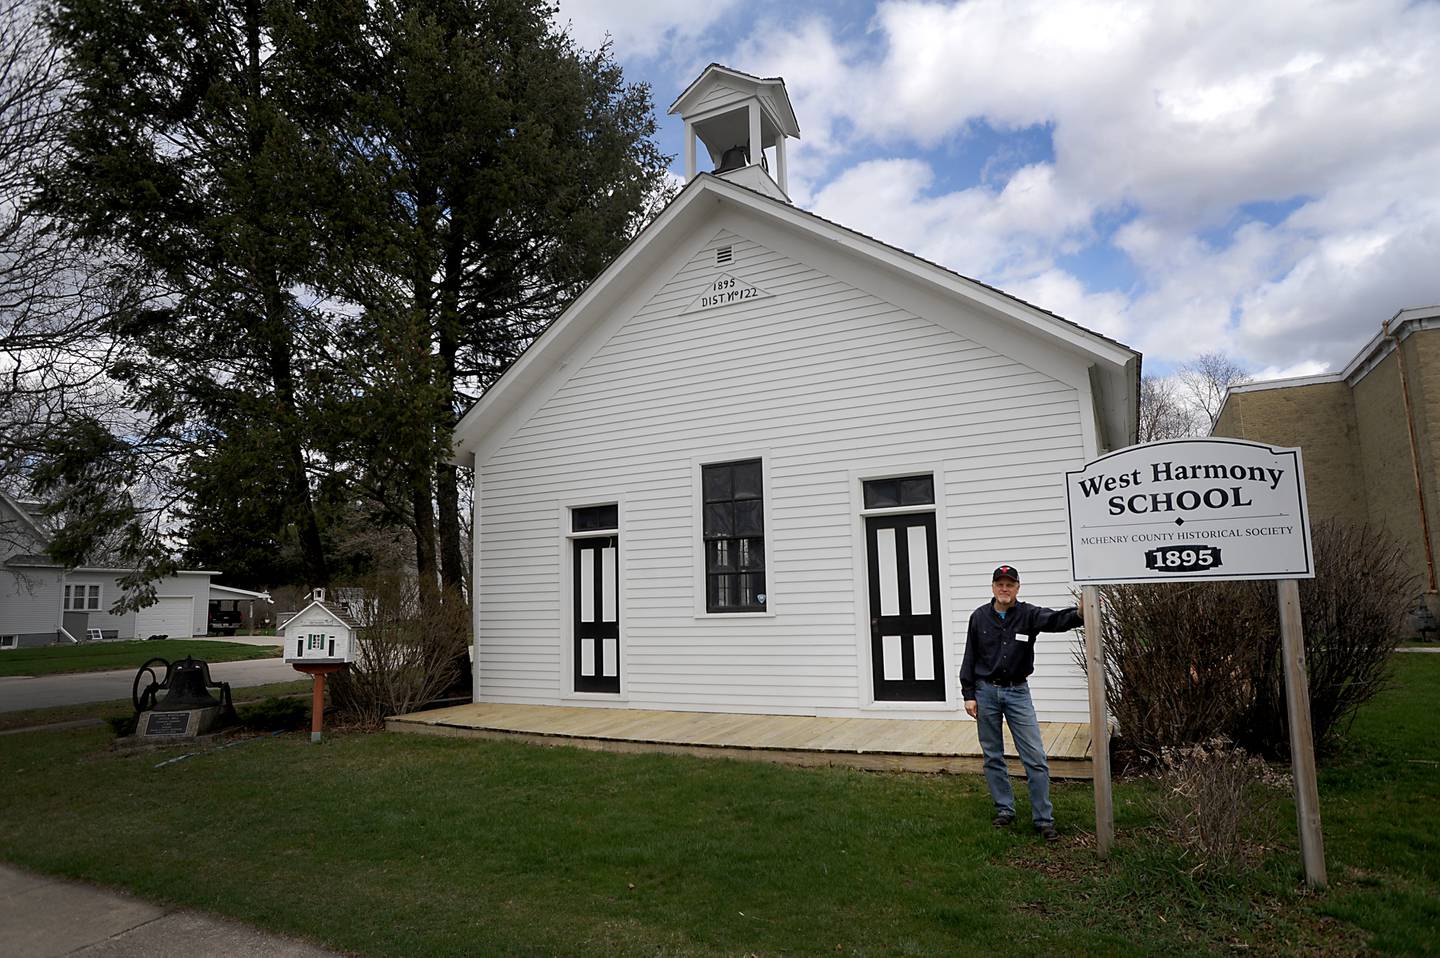 Kurt Begalka, the administrator of the McHenry County Historical Society and Museum, 6422 Main St. in Union, is photographed outside the museum's 1895 West Harmony School on Thursday, April 14, 2022.